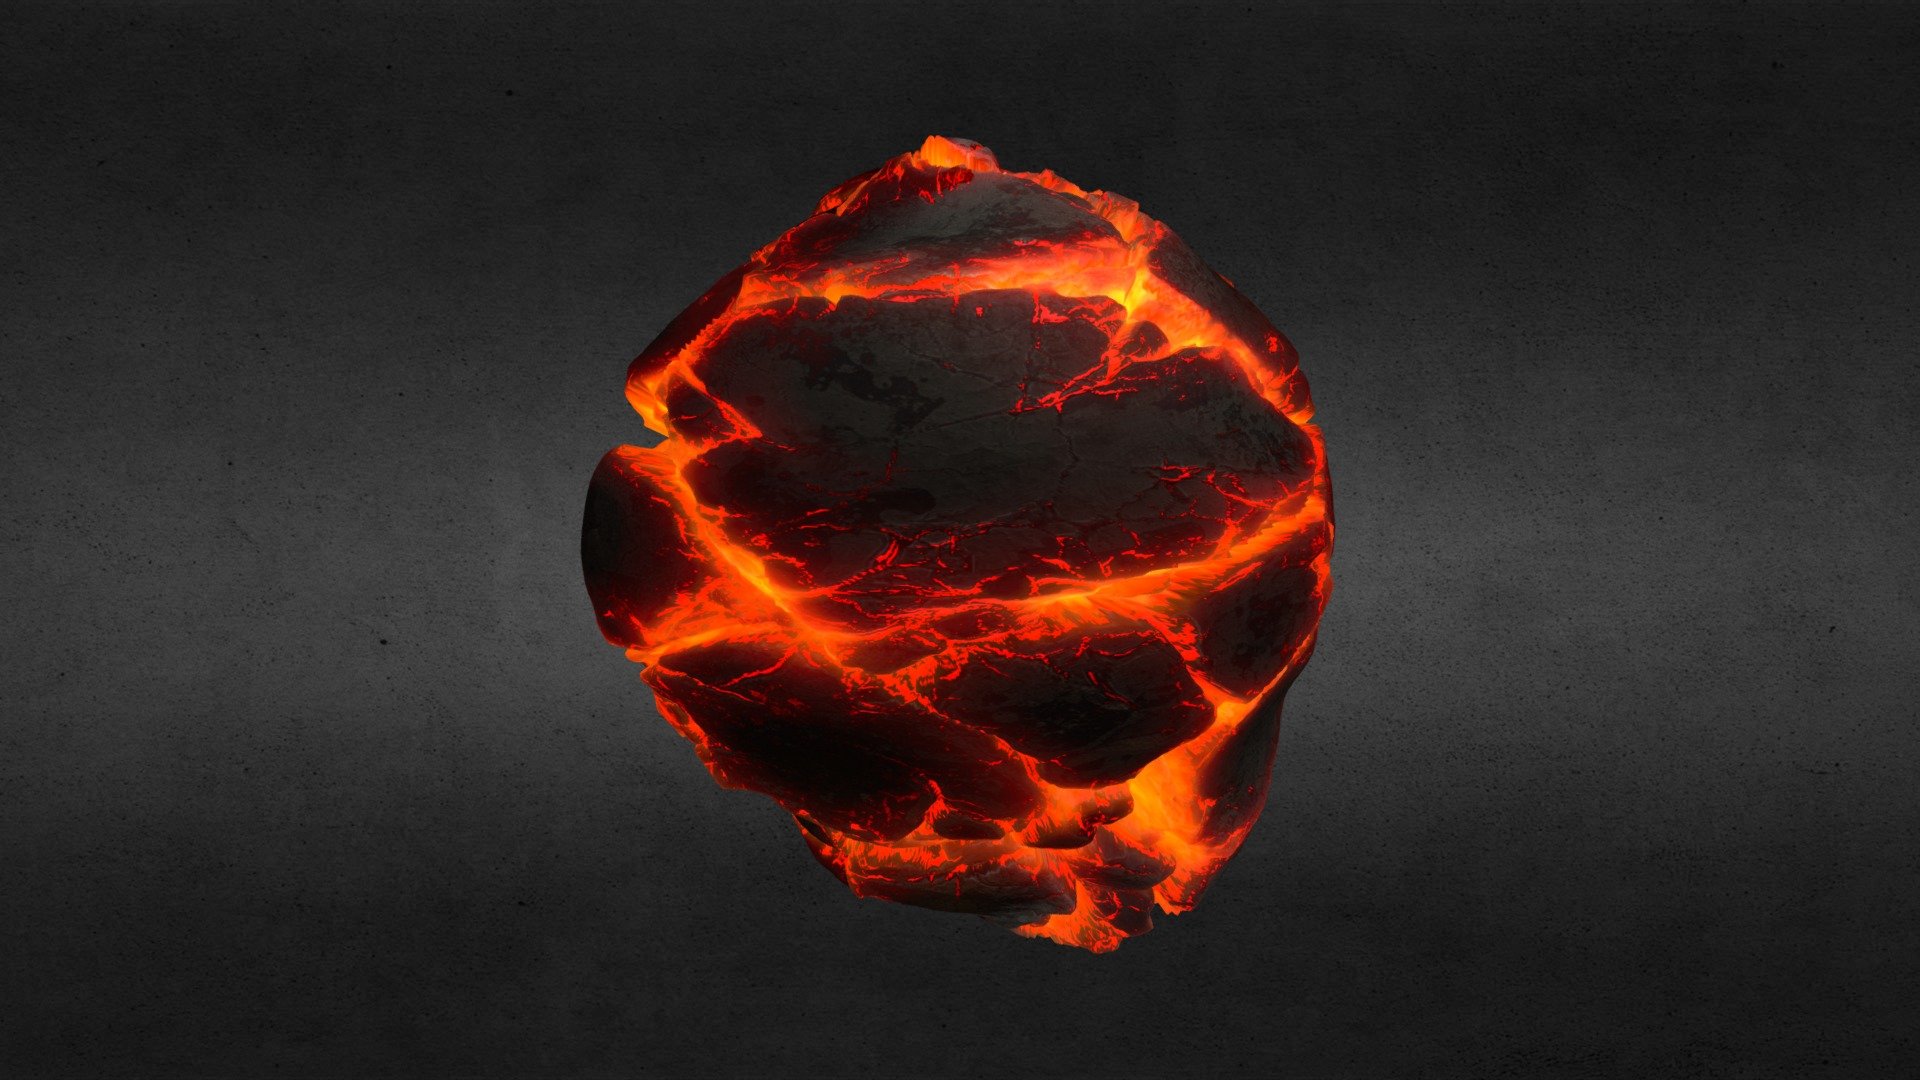 A rock of molten lava, with tileable textures for floor design in RPG games and such&hellip; glowmap included. The material is good for making molten rocks too! Texture resolution is 2k.

Showcase Mesh: MatSphere v1p4x (My custom Low-pinch